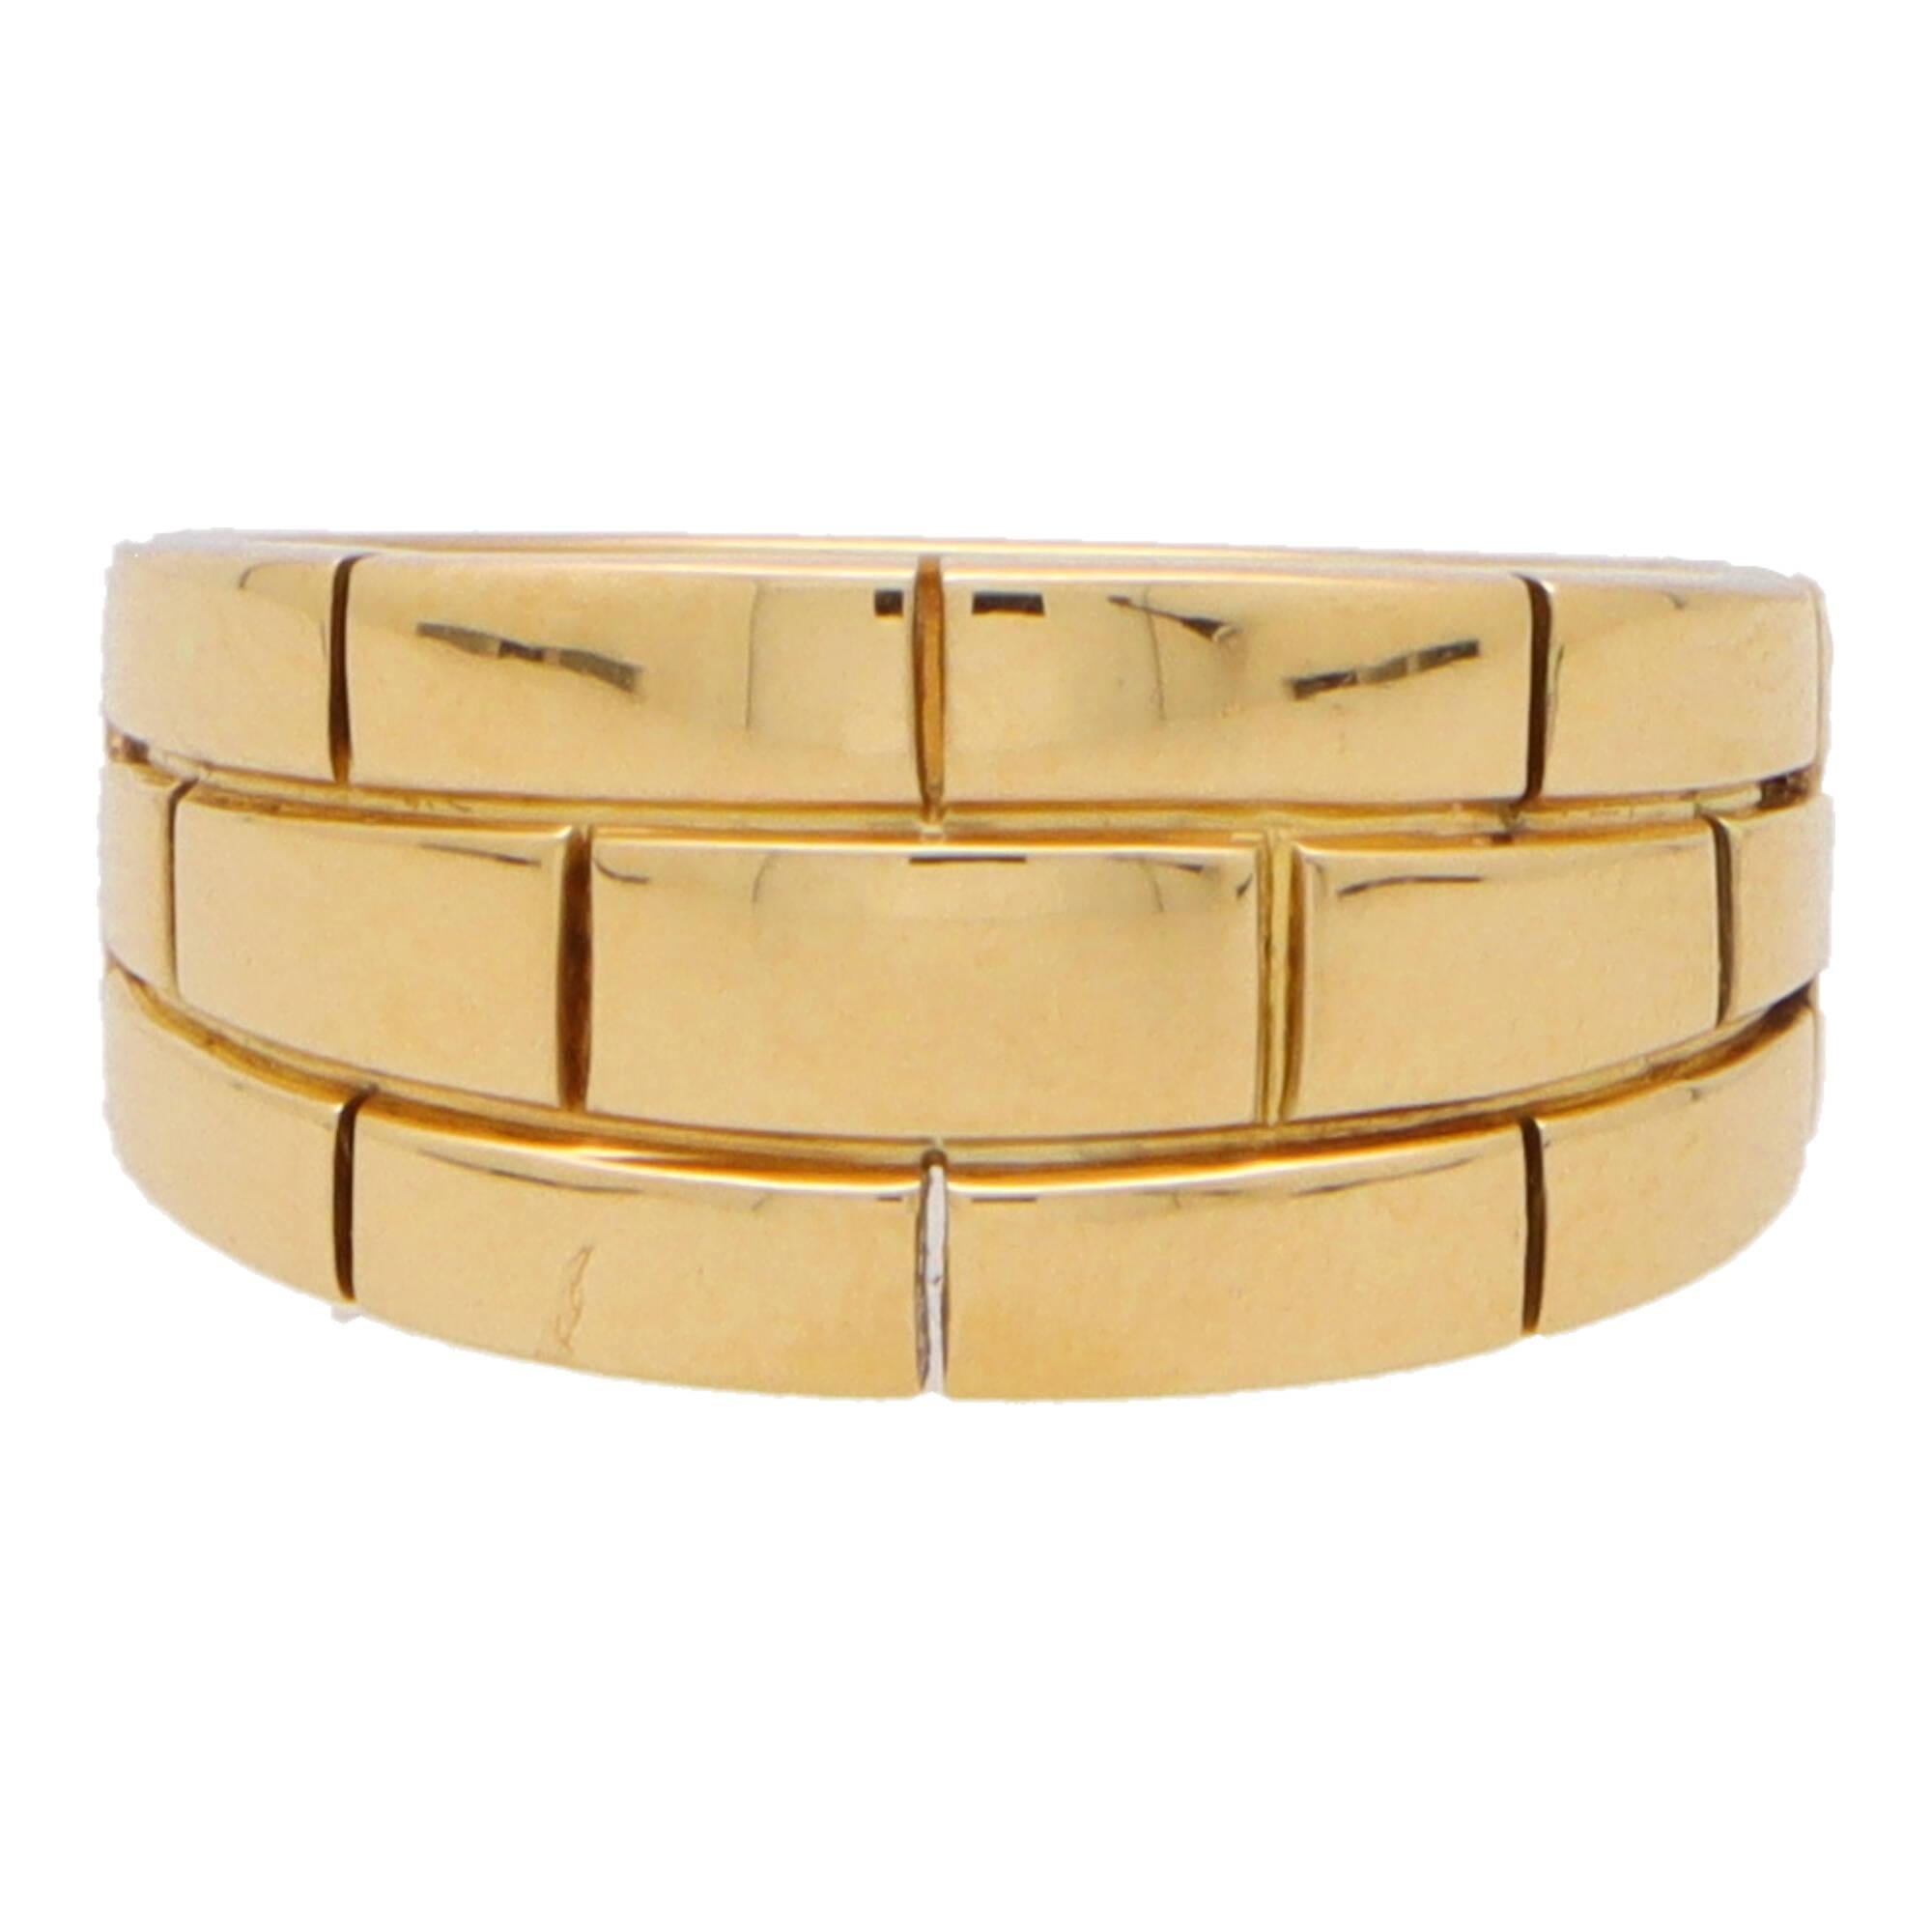 A beautiful vintage Cartier Maillon Panthère brick link motif ring set in 18k yellow gold.

The ring is comprised of 3 rows of brick link design panels which travel half way around the band. The width of the band graduates nicely and the ring would